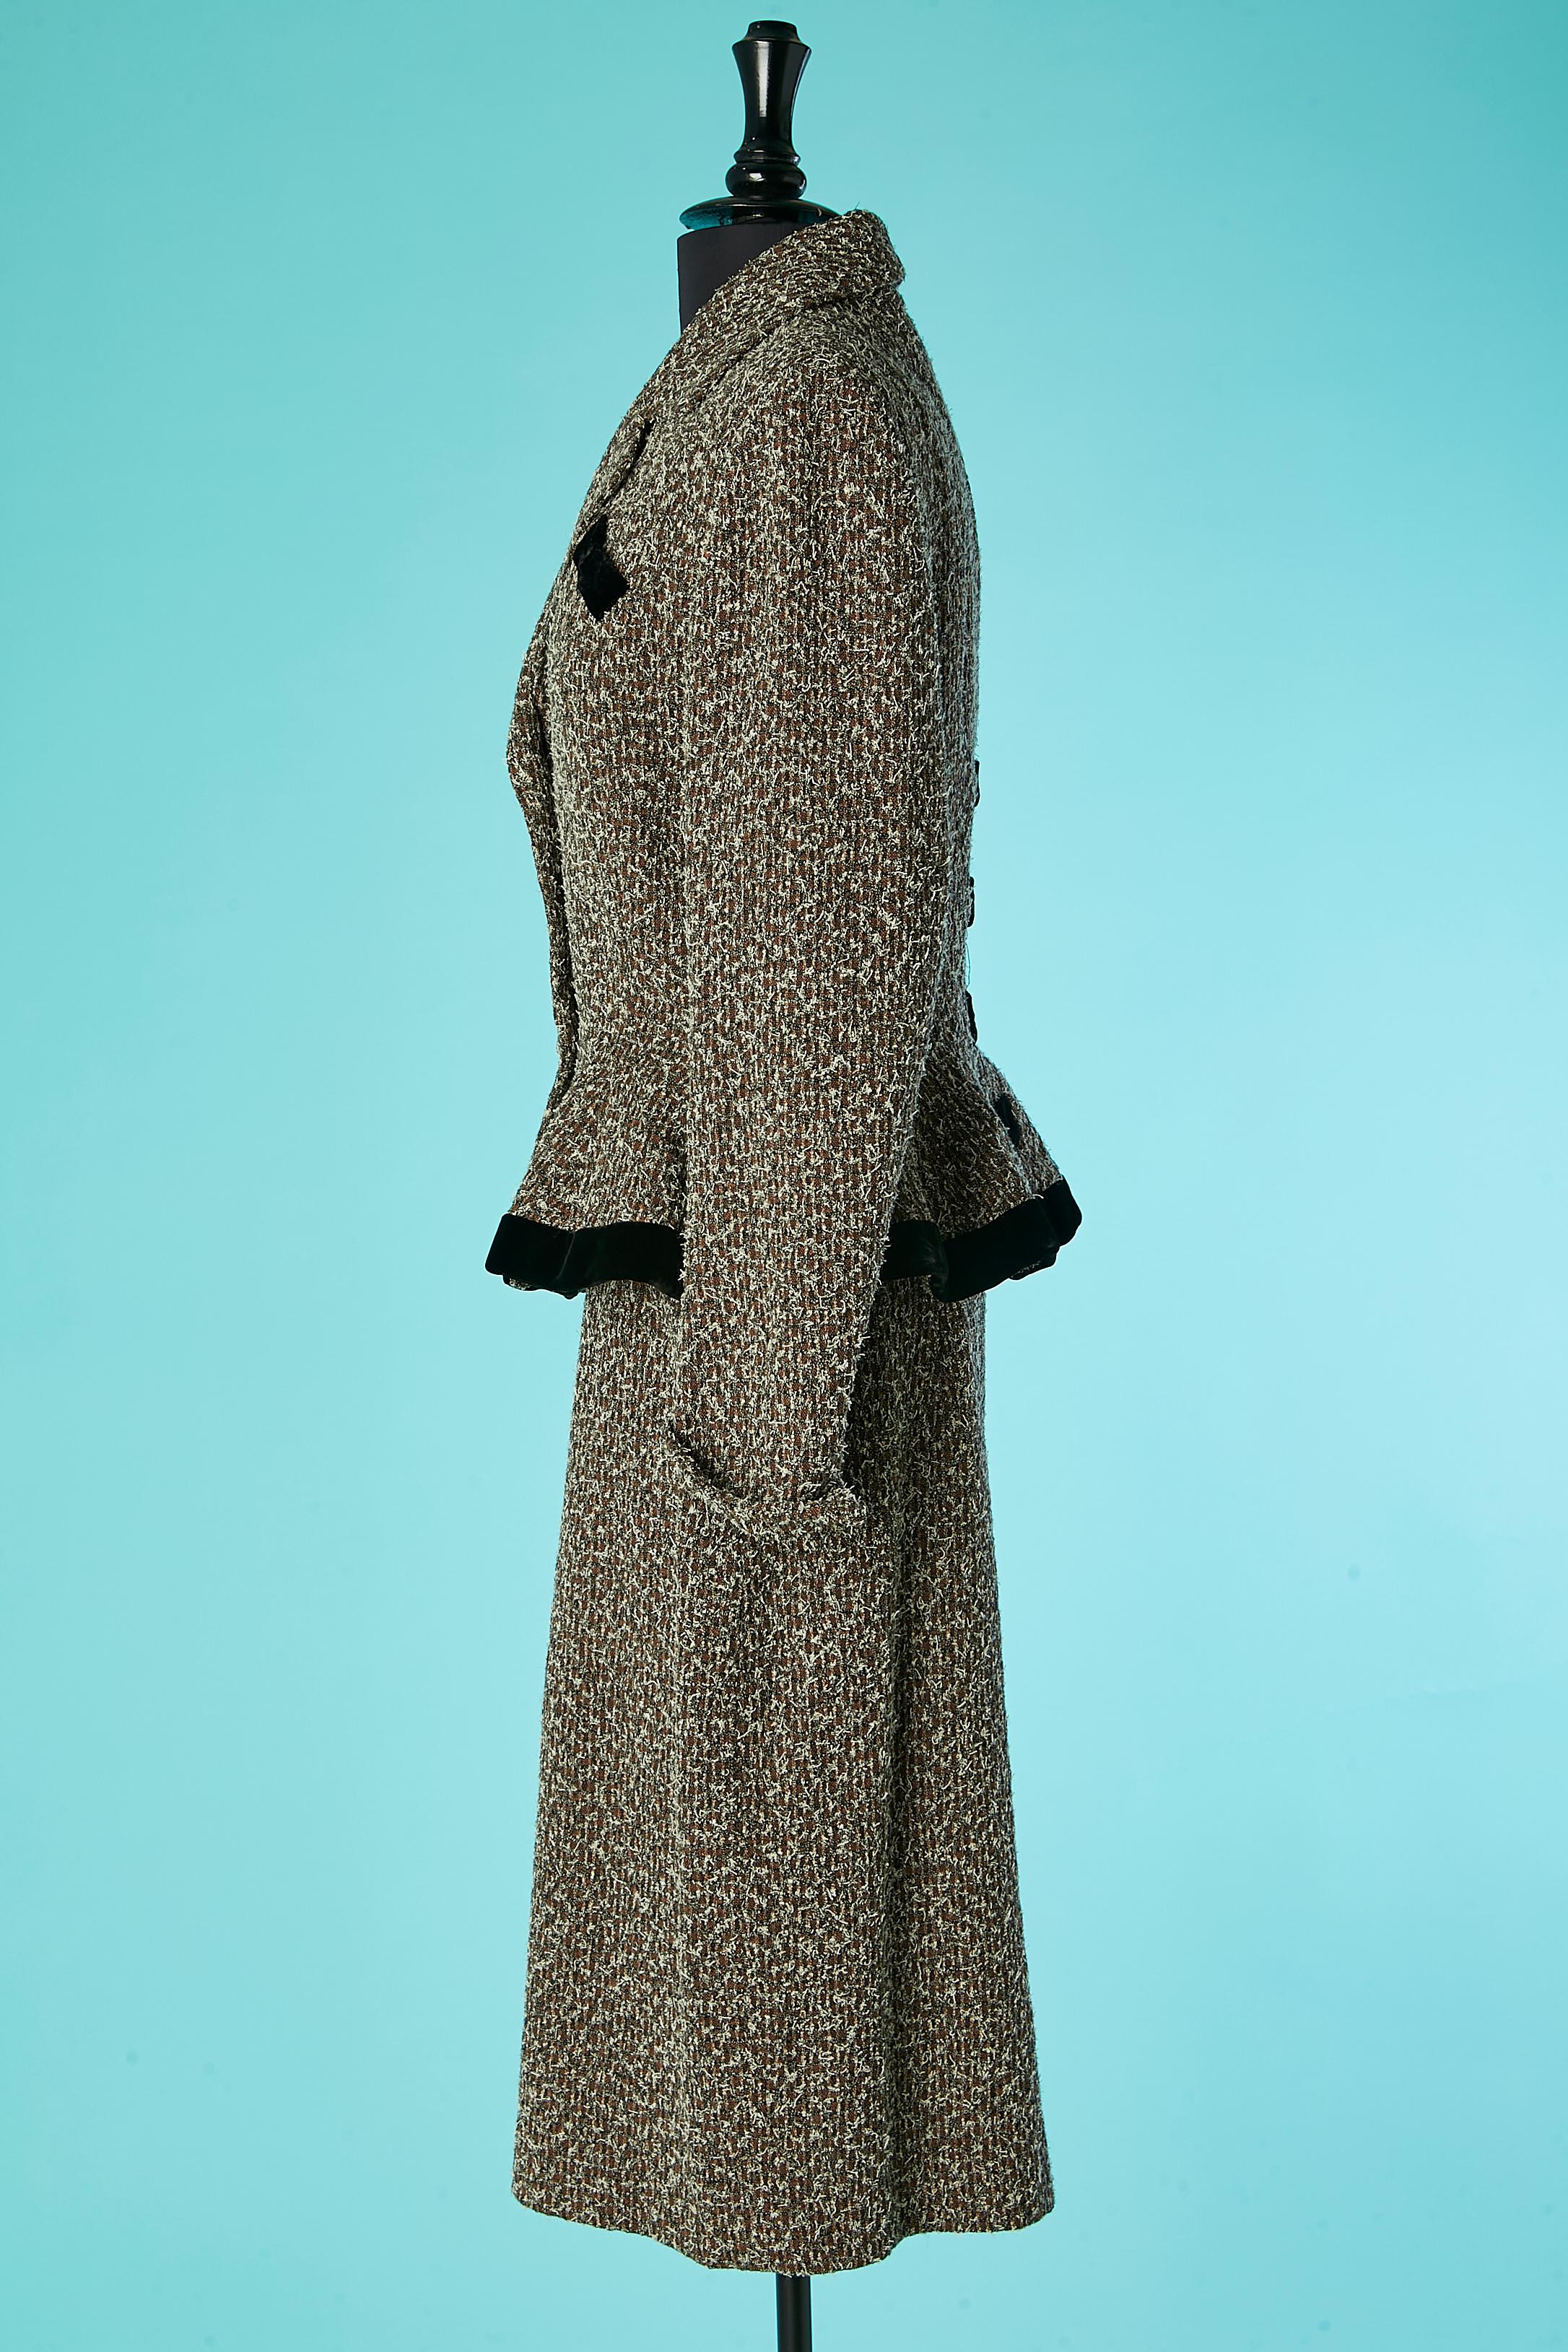 Chiné tweed skirt-suit with black velvet details and edge Lilli Ann Circa 1940's For Sale 1